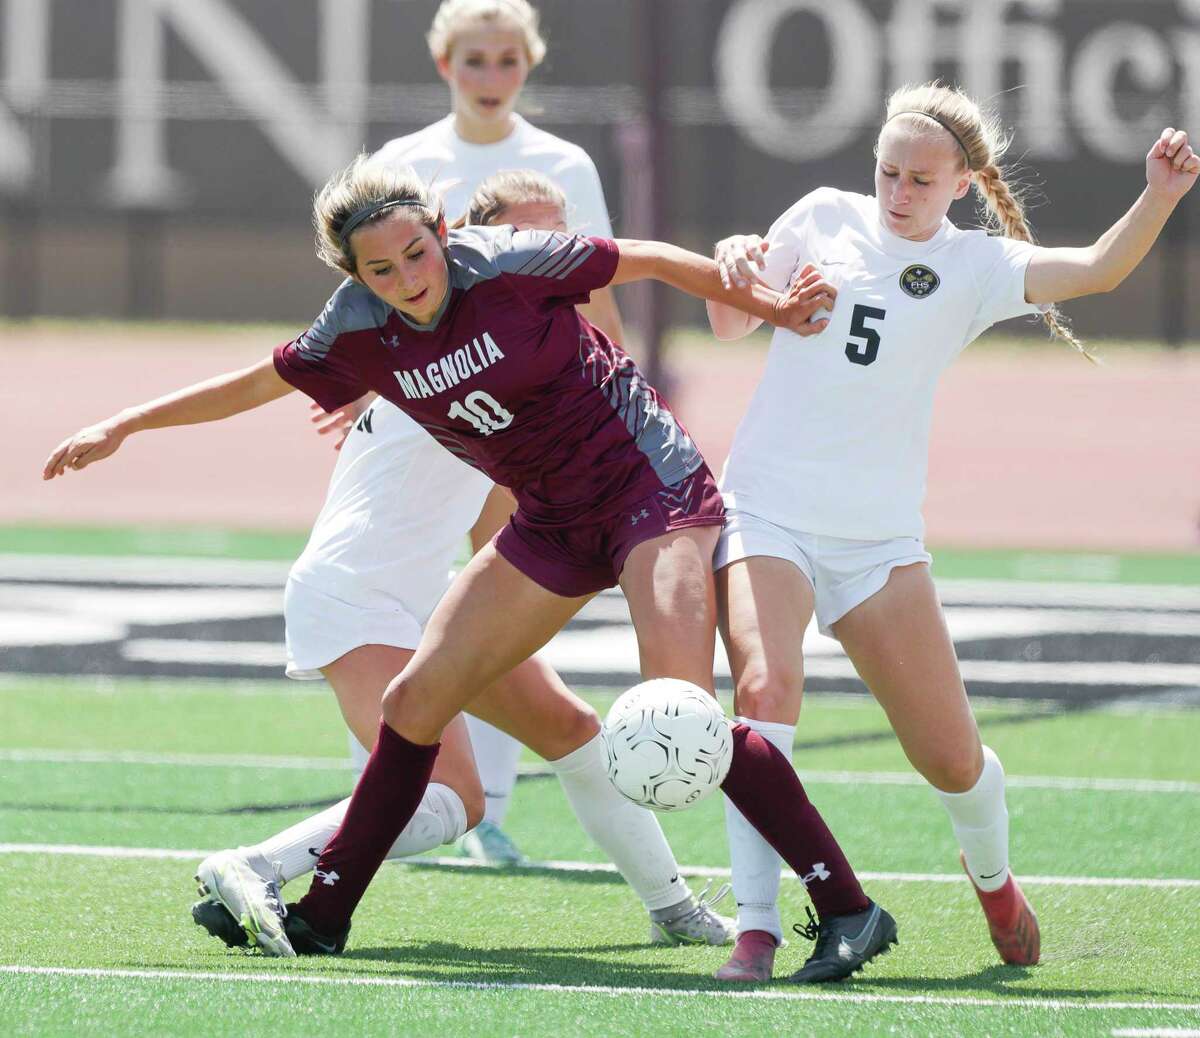 Magnolia’s Laney Gonzales (10) battles for position against Foster's Ashley Bell (5) in the second half of a Region III-5A semifinal high school soccer match at Turner Stadium, Friday, April 8, 2022, in Humble.